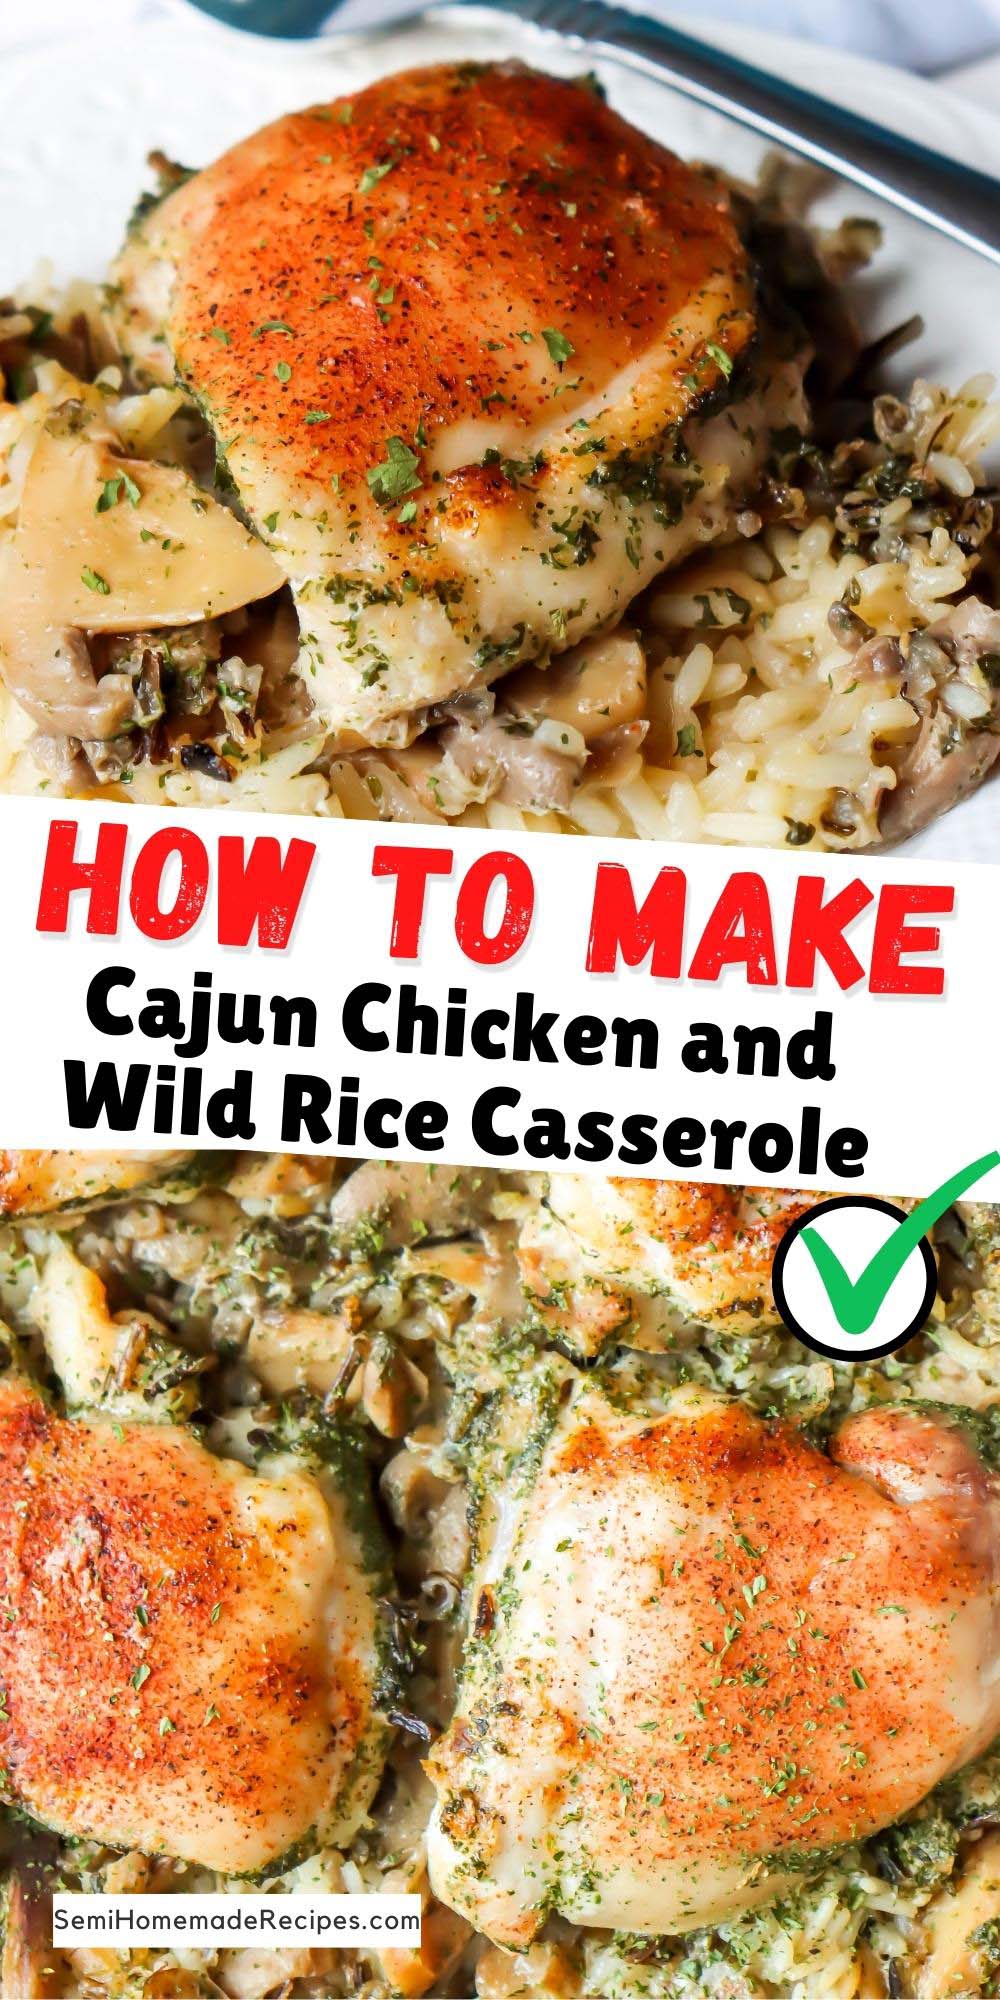 This Cajun Chicken and Wild Rice Casserole is a one pan dinner that is super easy to make and ready in under and hour. Chicken Thighs are seasoned with cajun seasoning and baked on top of seasoned wild rice for the perfect dinner.  